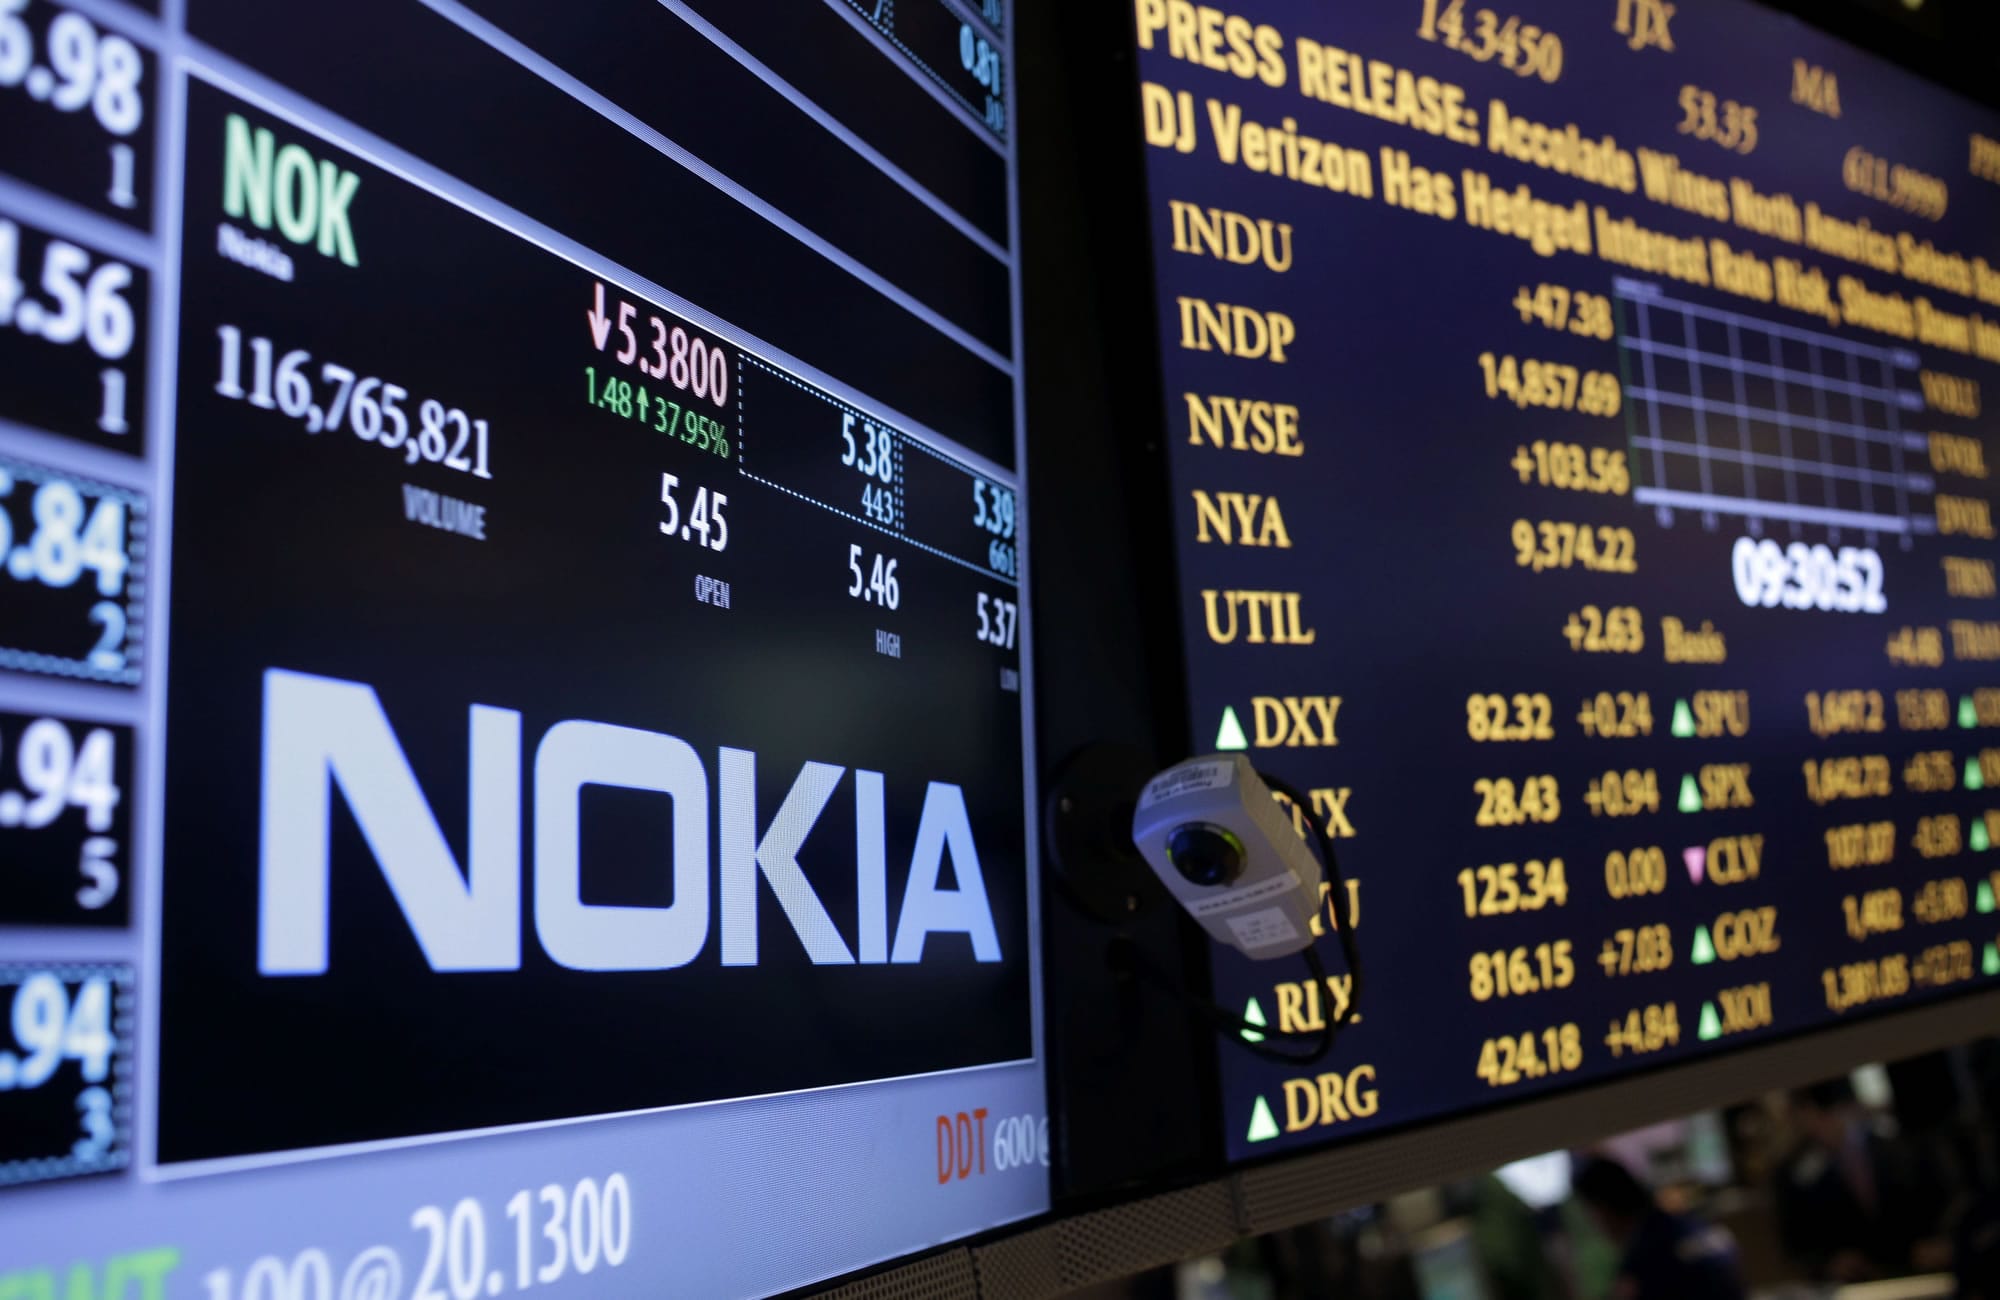 The Nokia brand name is displayed on the floor of the New York Stock Exchange in New York on Tuesday.